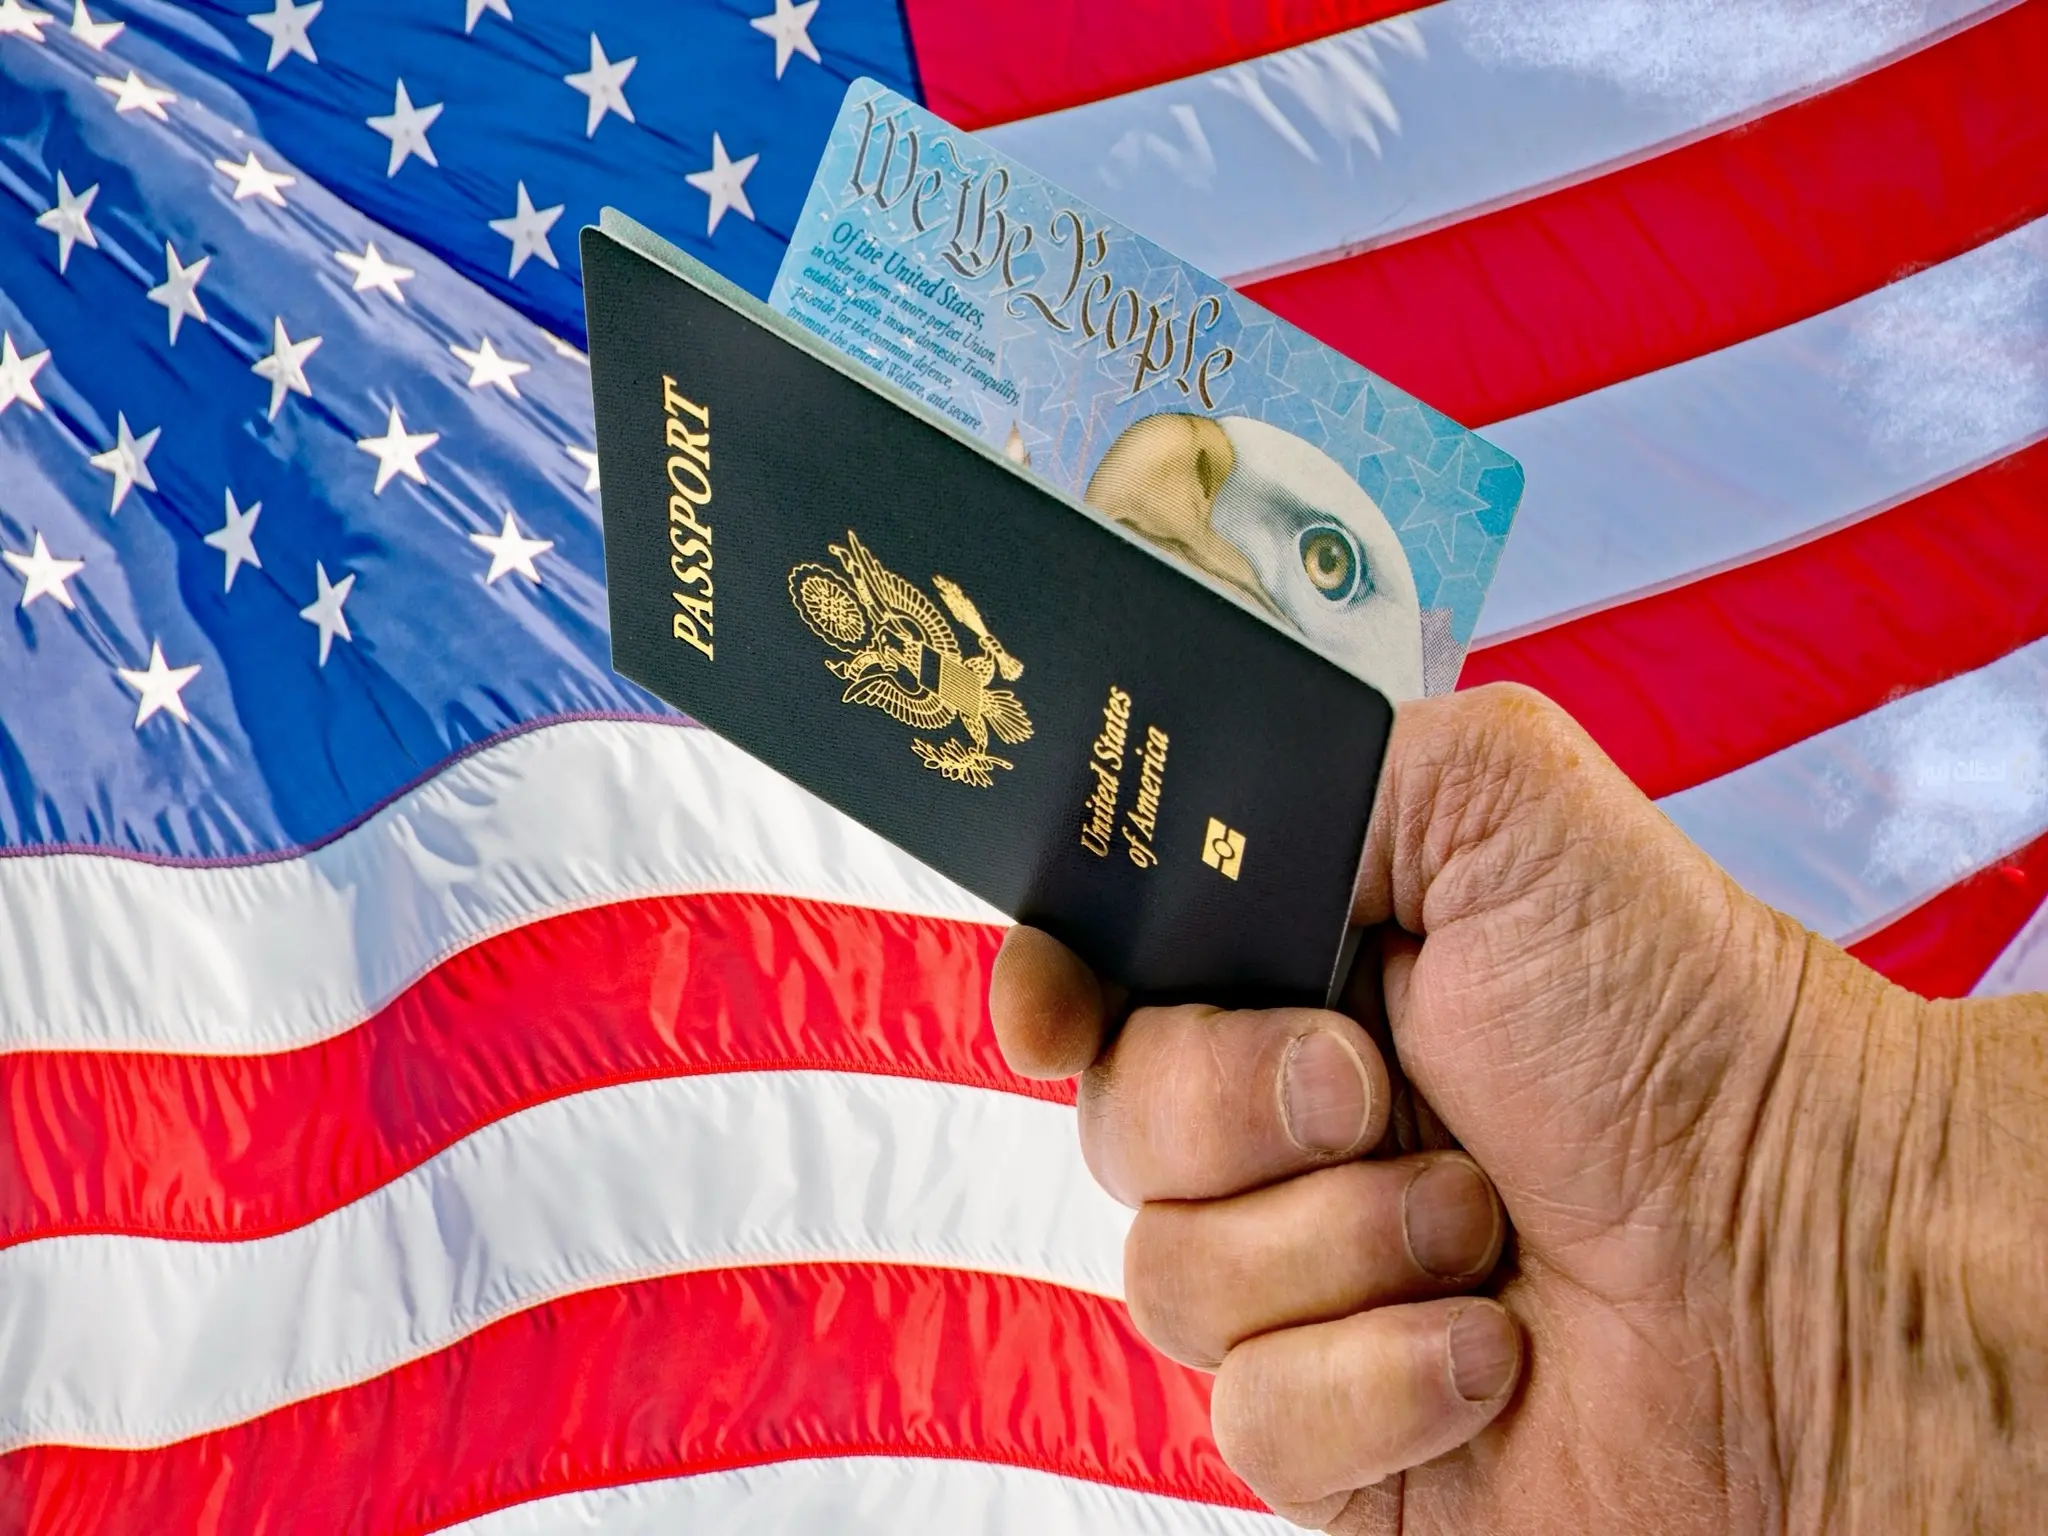 Announcing the nationalities that have the right to asylum in America and how to apply for asylum